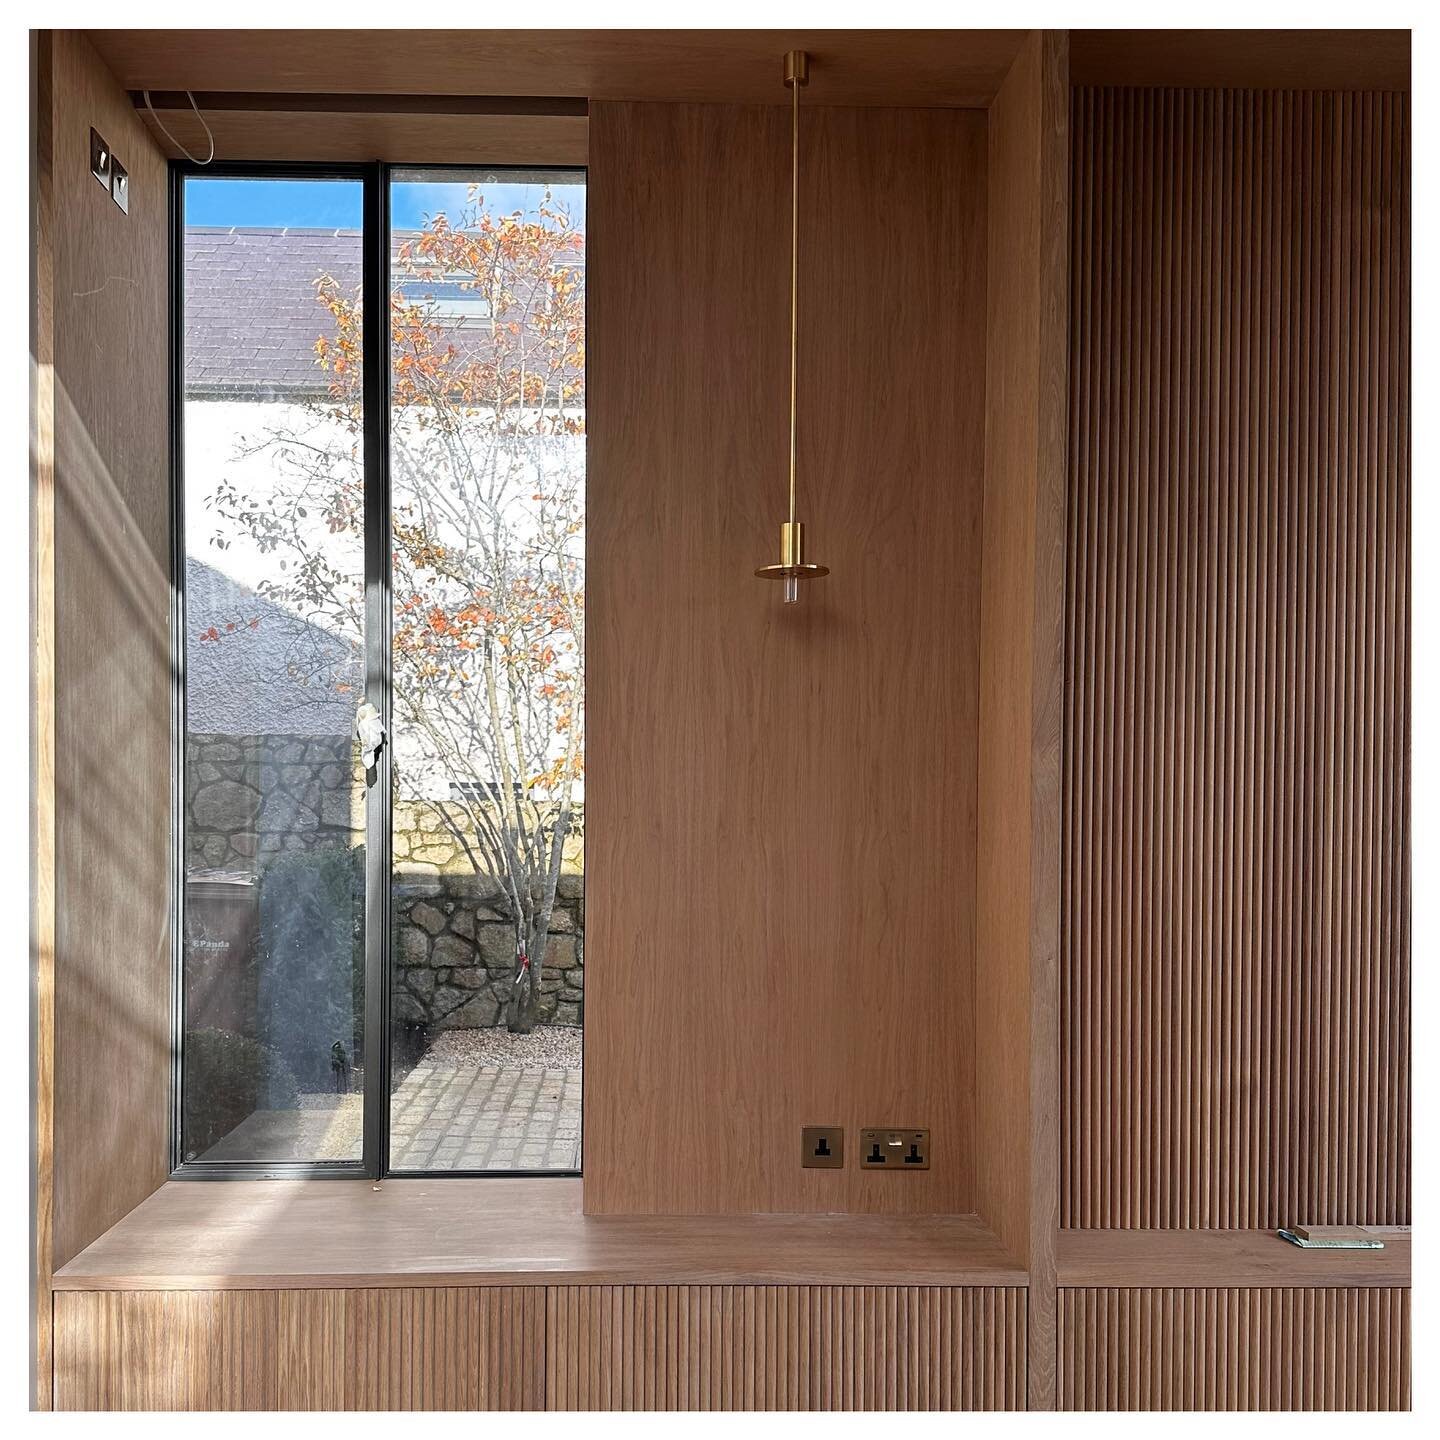 Morning light streaming through the window on this project nearing completion. Beautiful oak joinery frames the window to create a seat with a stunning brass light fitting off set. #interiordesign
#renovate
#joinery
#irishhomes 
#irishinteriors
#luxu